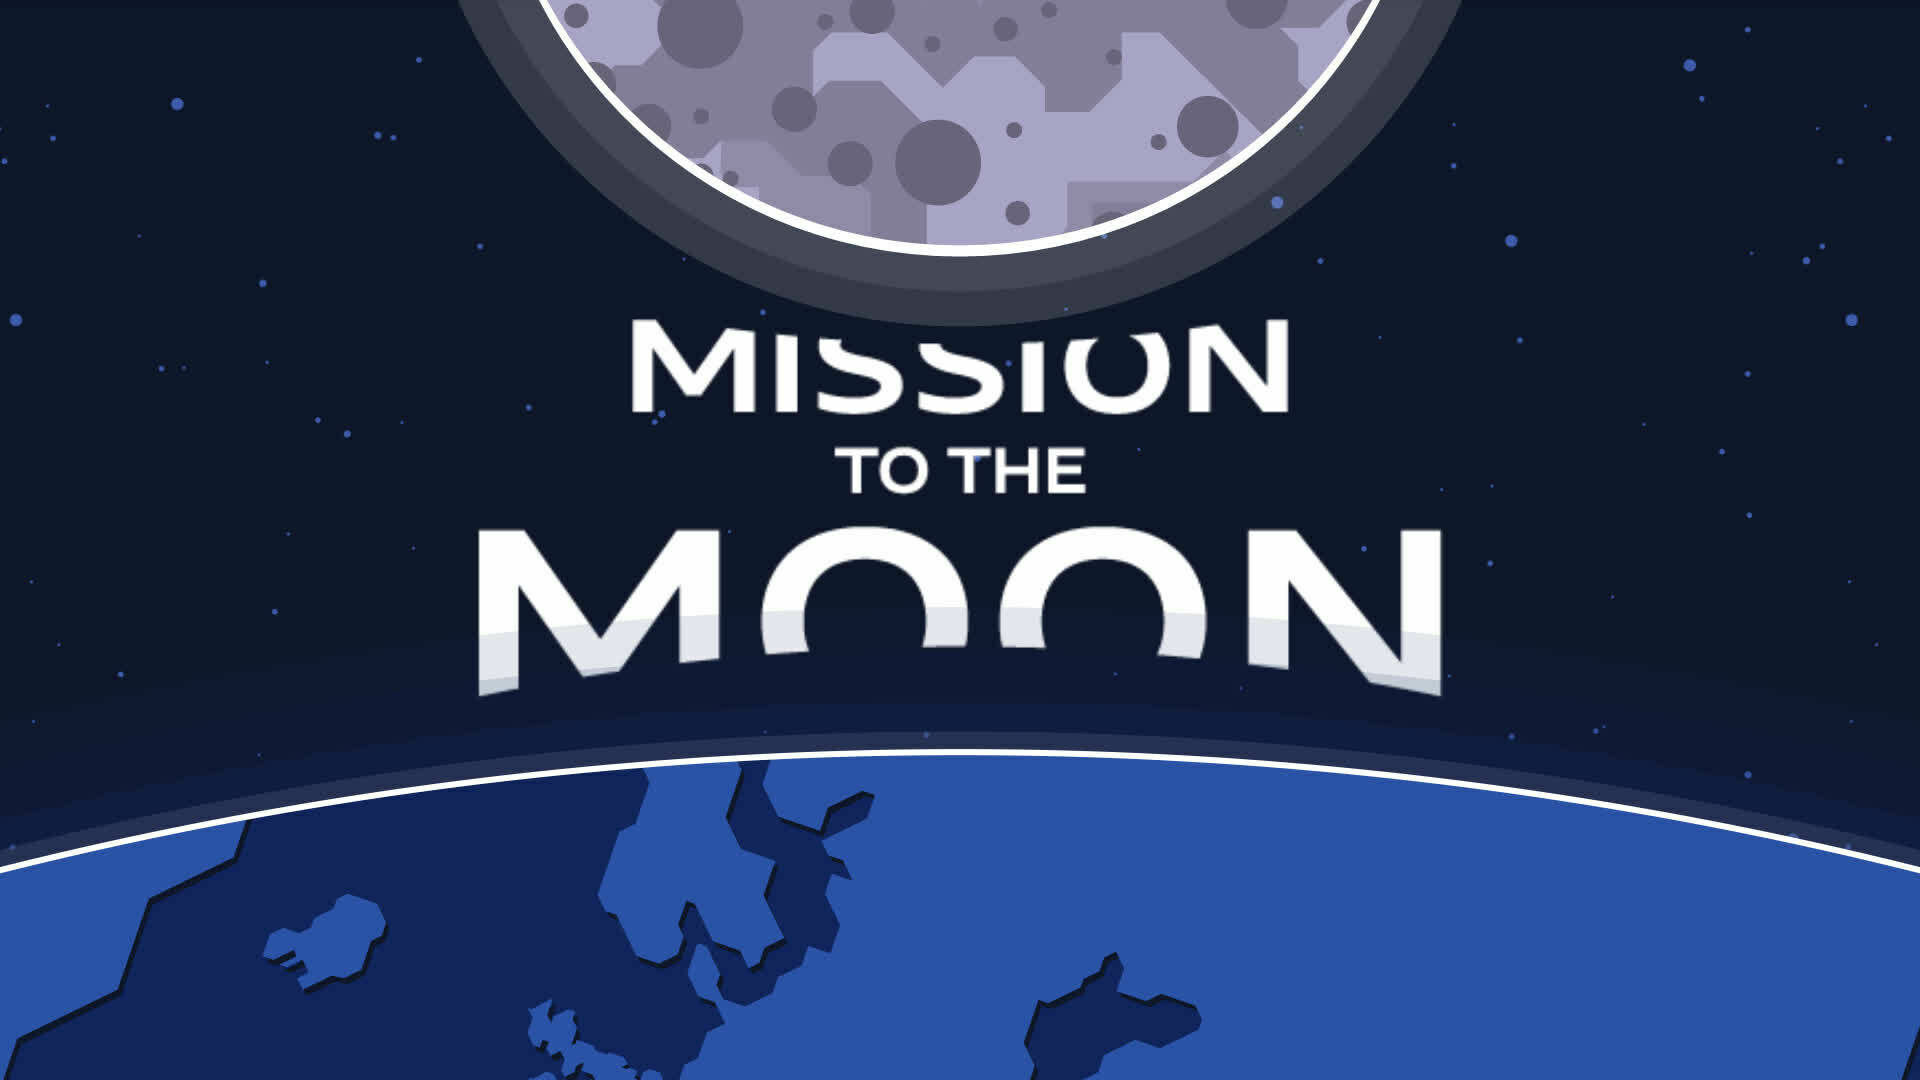 Mission to the Moon - The Journey